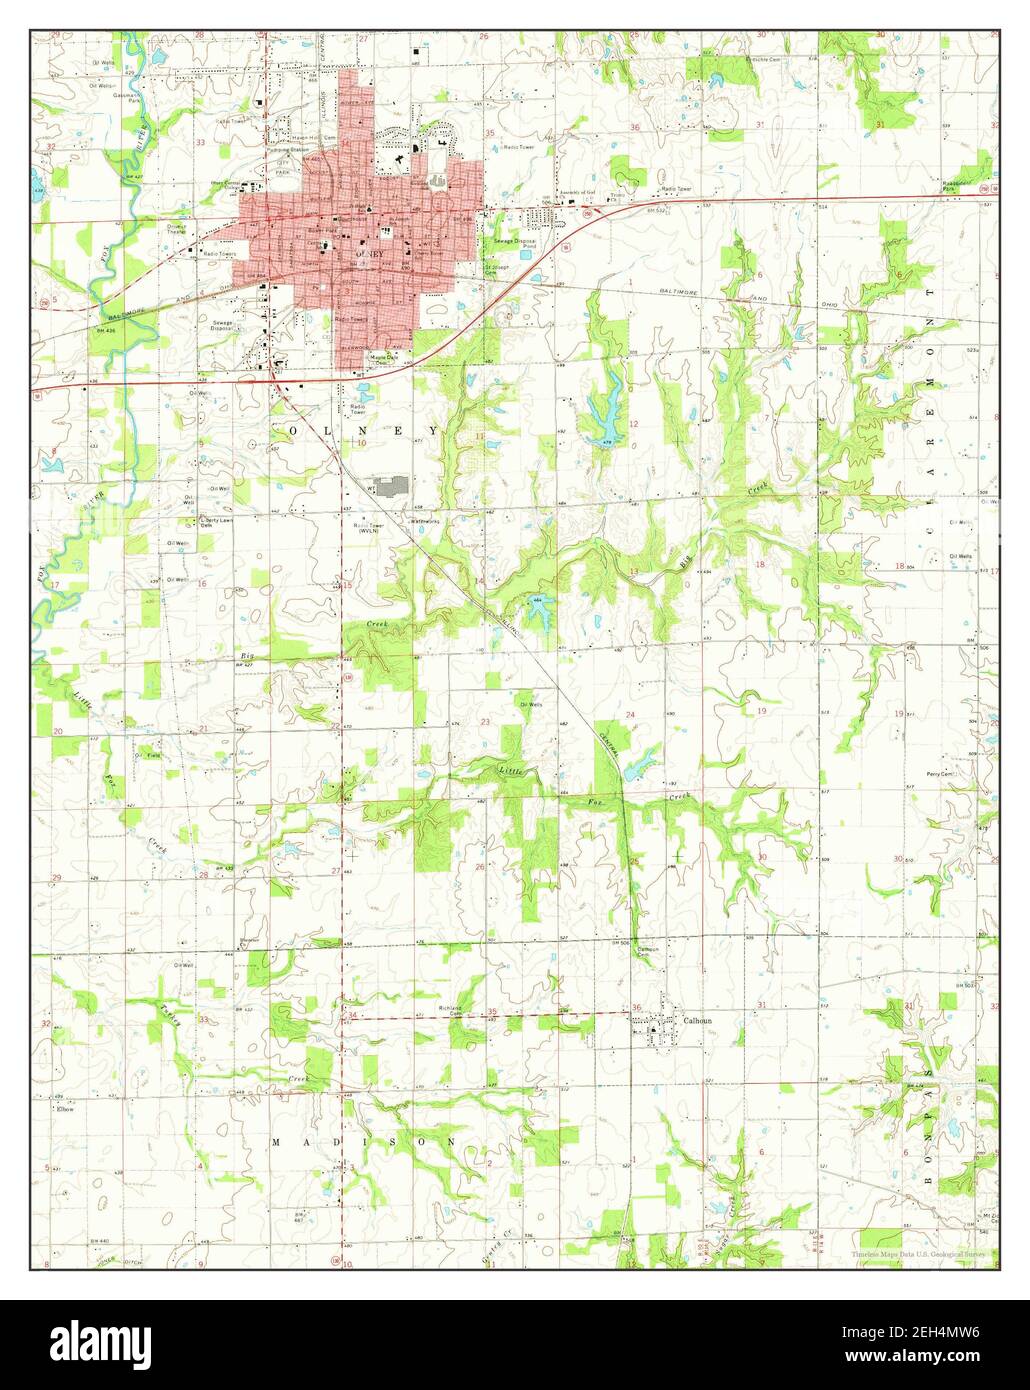 Olney Illinois Map 1971 124000 United States Of America By Timeless Maps Data Us Geological Survey 2EH4MW6 